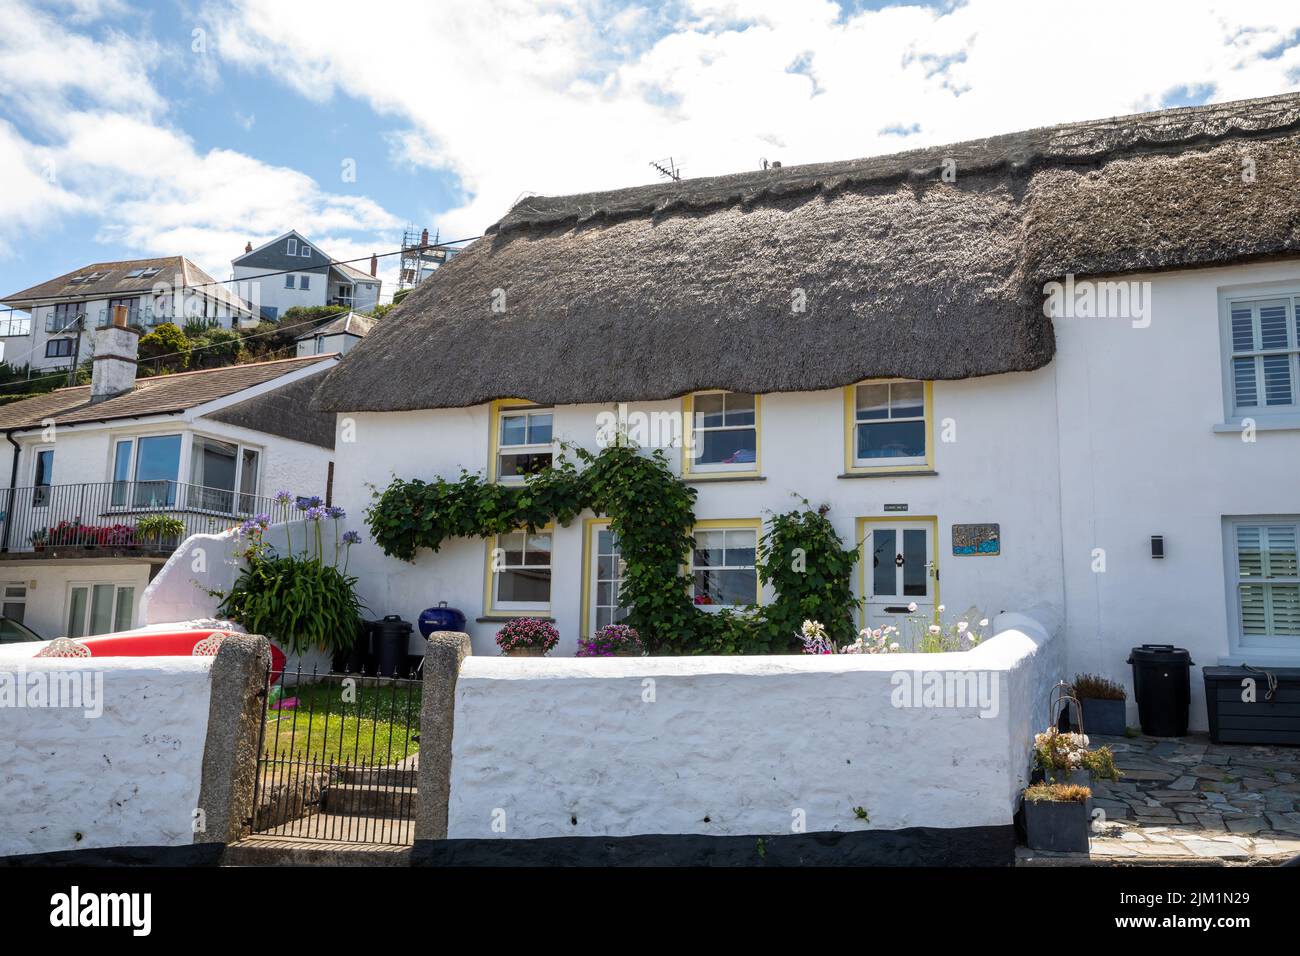 Thatched Roof cottages in Coverack, Cornwall,UK Stock Photo